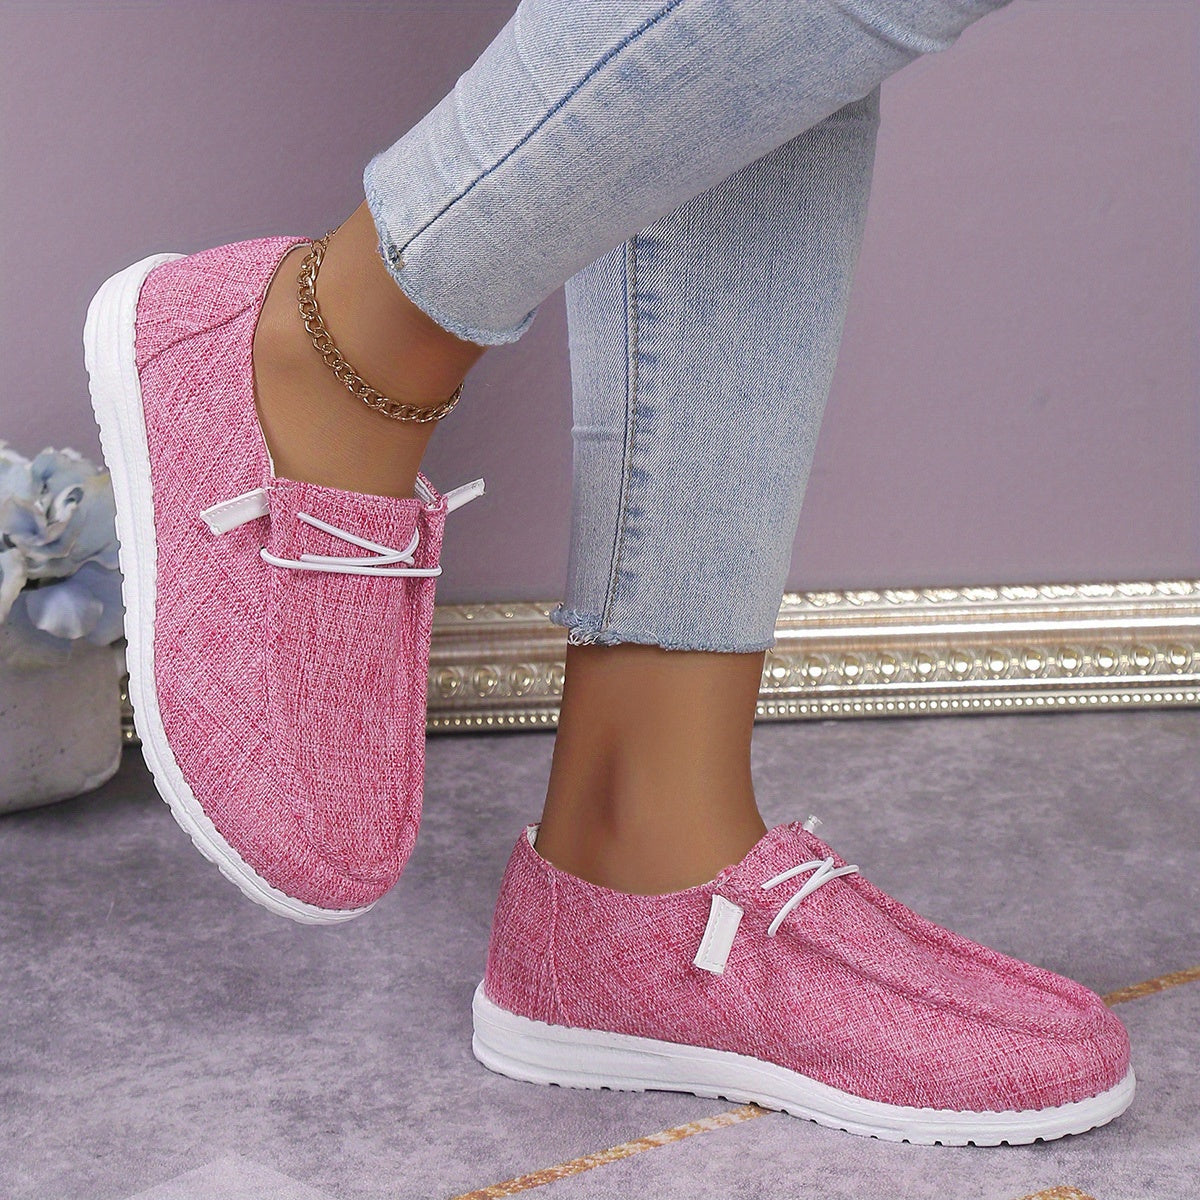 Women's Casual Canvas Sneakers, Fashion Plain Toe Solid Color Lace Up Slip On Flat Shoes, Lightweight & Versatile Shoes